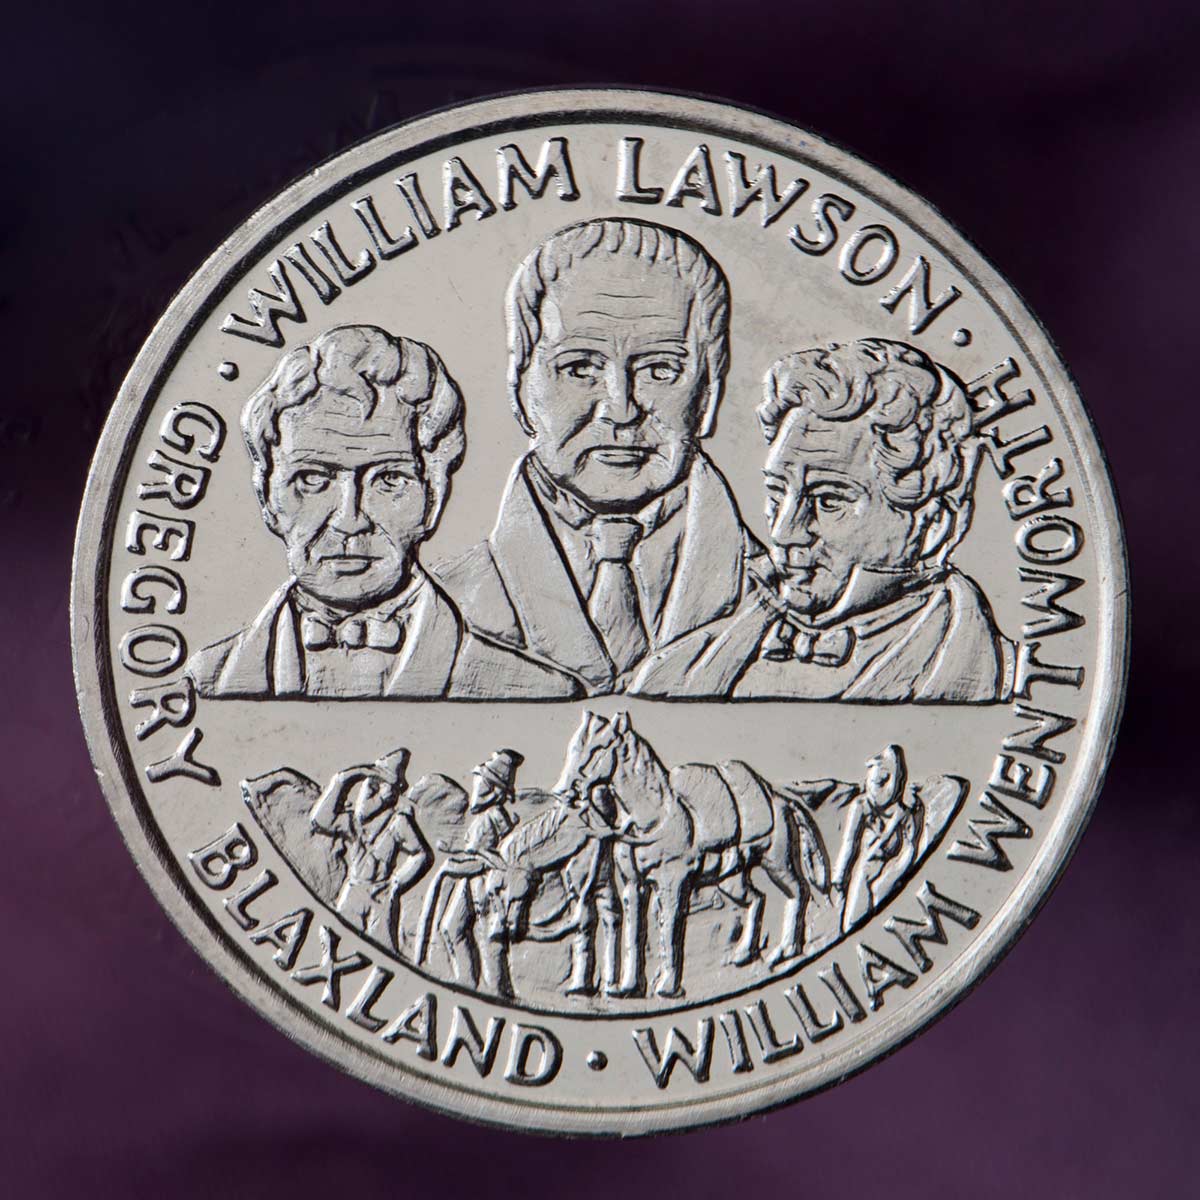 A silver medal against a purple background. In the top half are portraits of Gregory Blaxland, William Wentworth and William Lawson, and in the bottom half are the men with horses against a mountain backdrop.